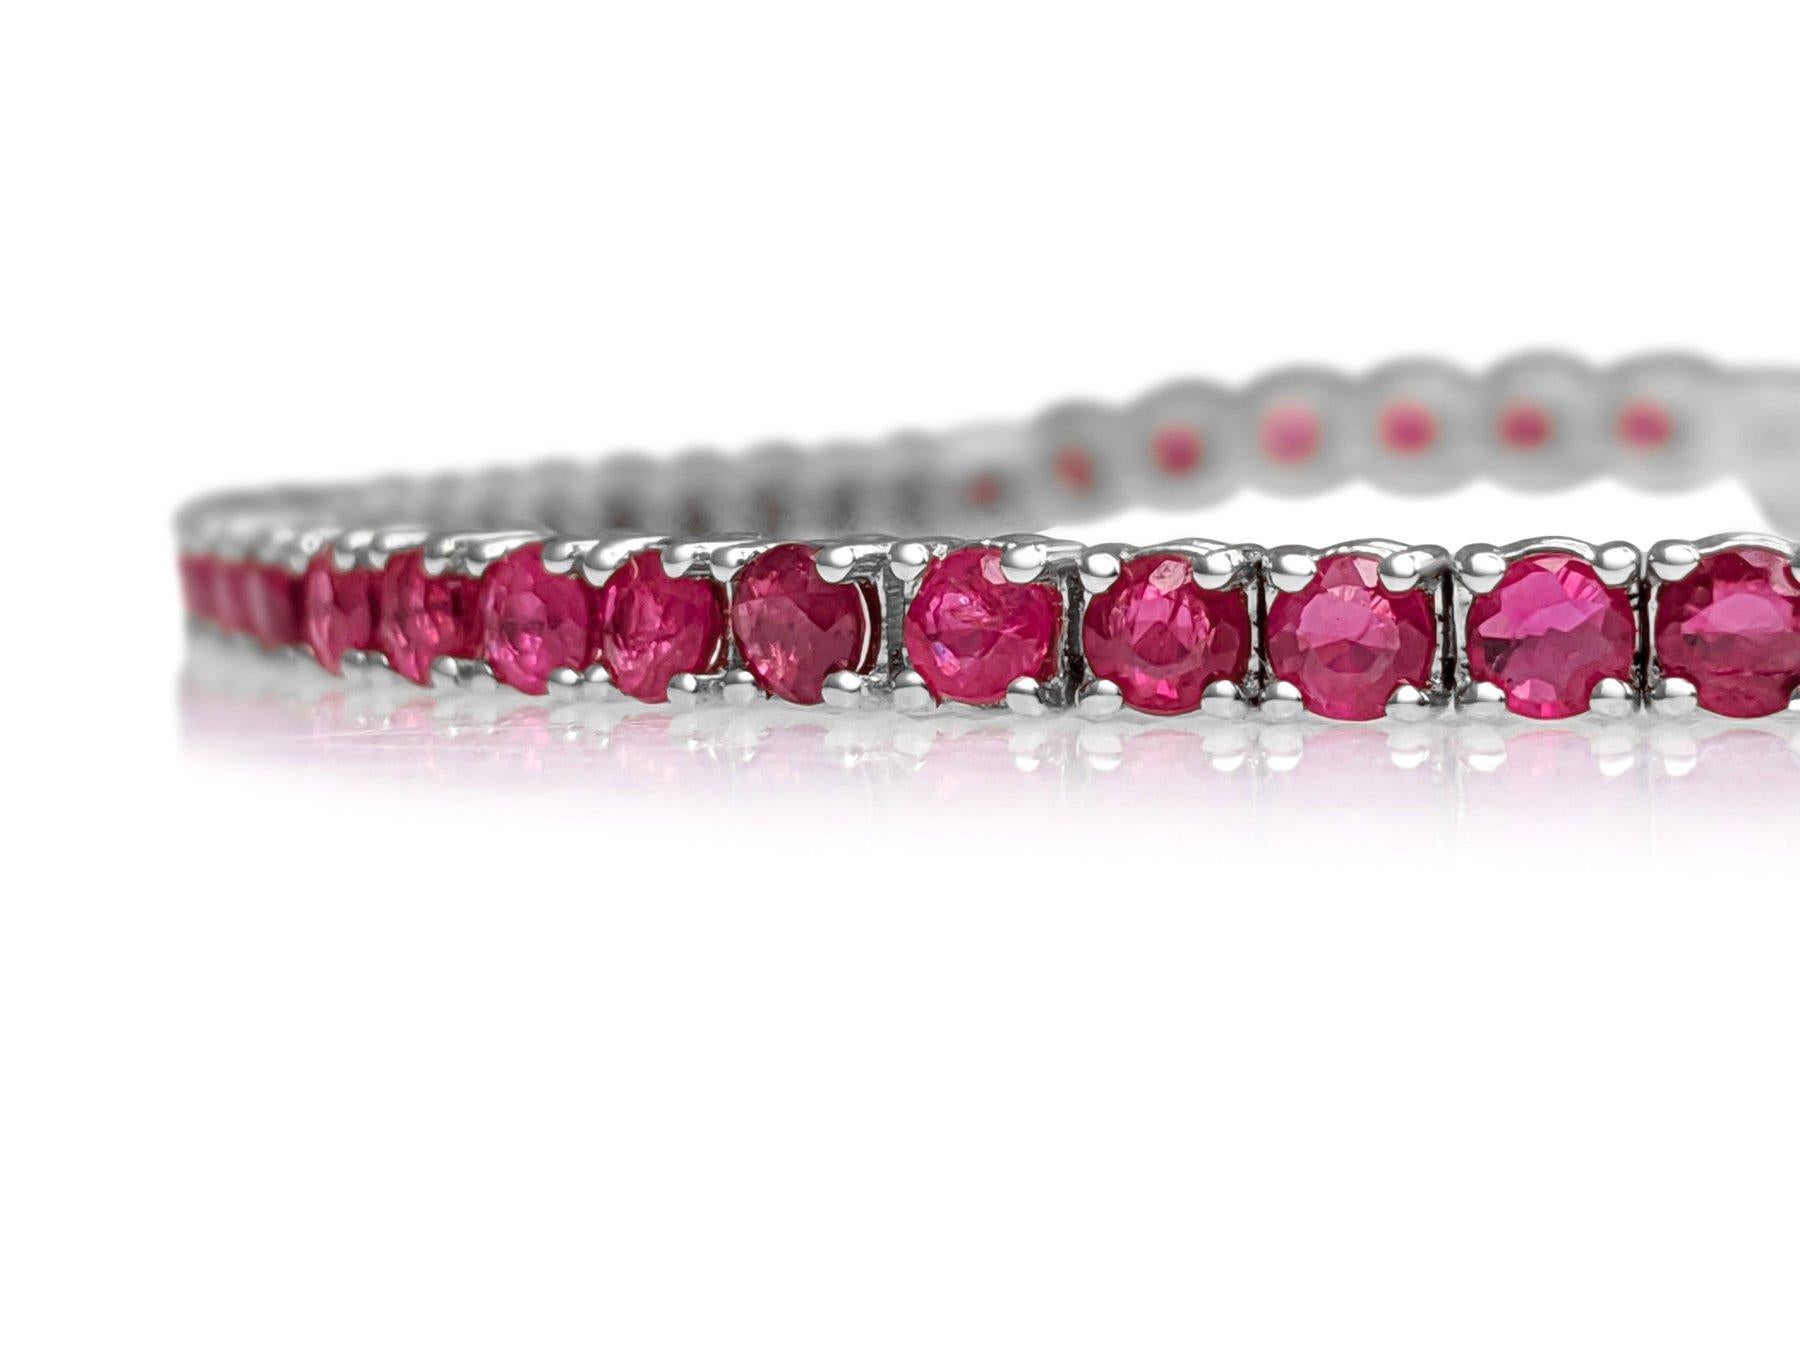 Women's NO RESERVE! 4.88Ct Natural Rubies Tennis Riviera - 14kt White gold - Bracelet For Sale